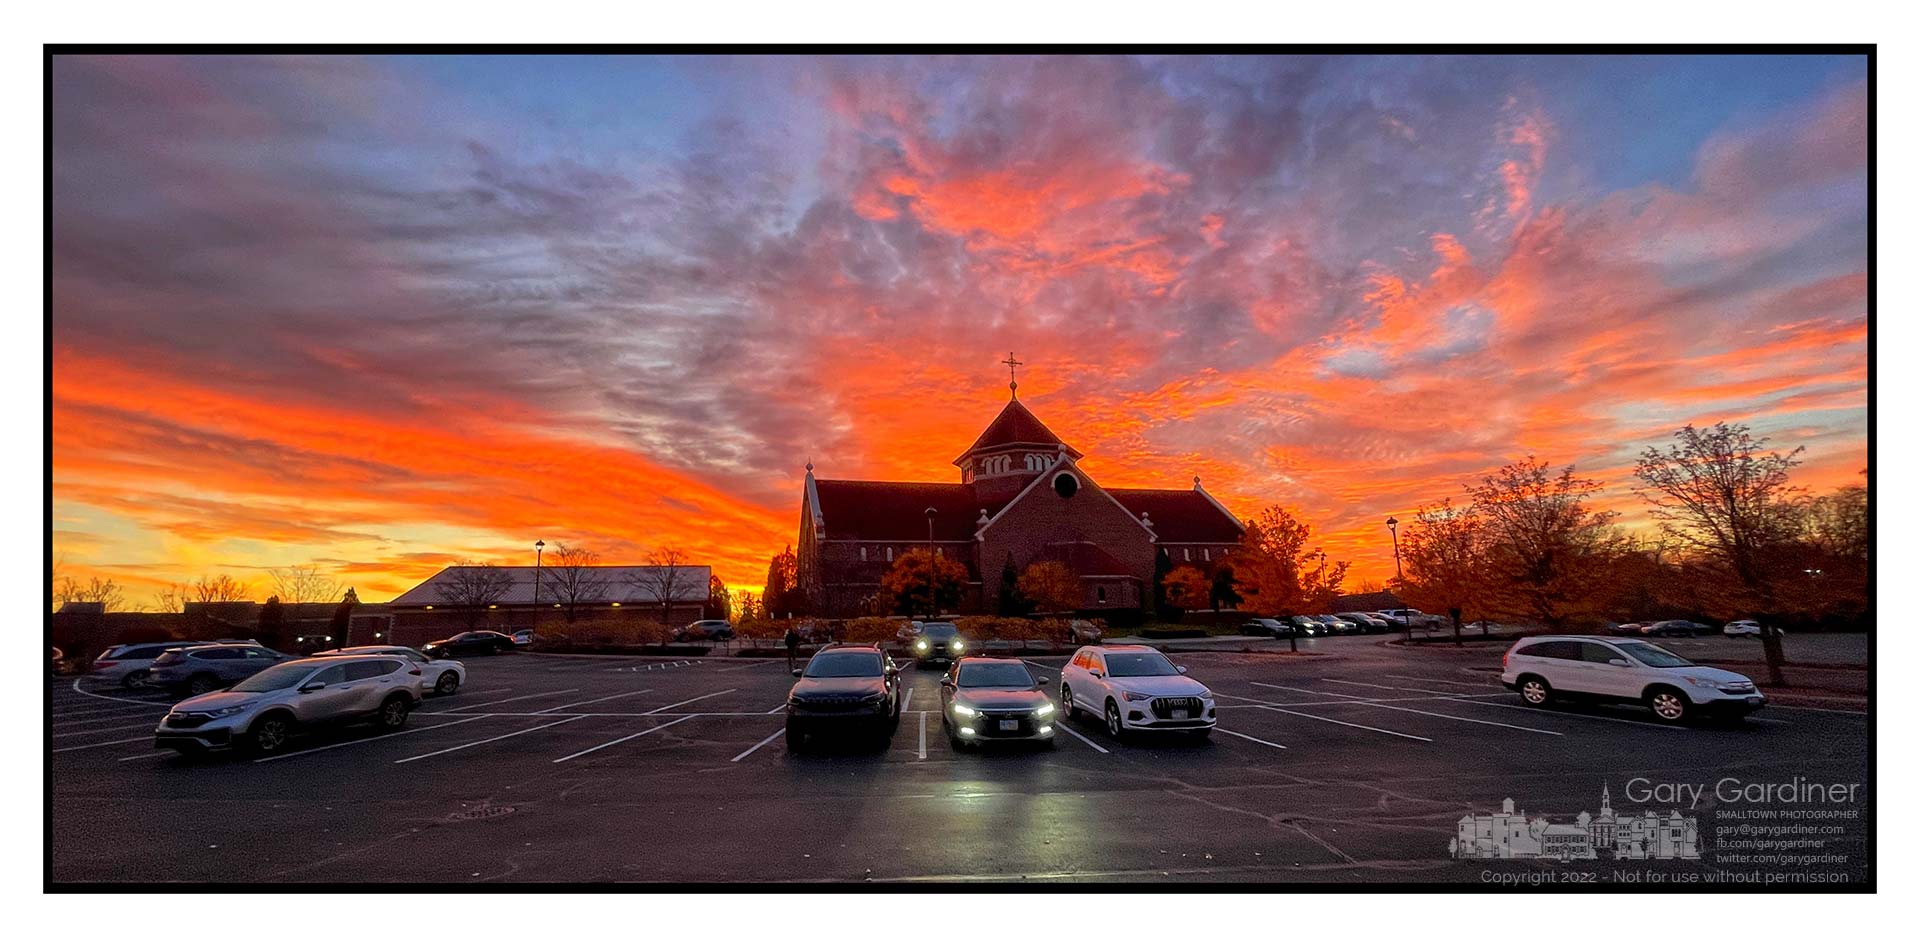 The morning sun creates a bright, colorful sky as parishioners arrive for the first Mass of the day at St. Paul the Apostle Catholic Church in Westerville, Ohio. My Final Photo for October 29, 2022.